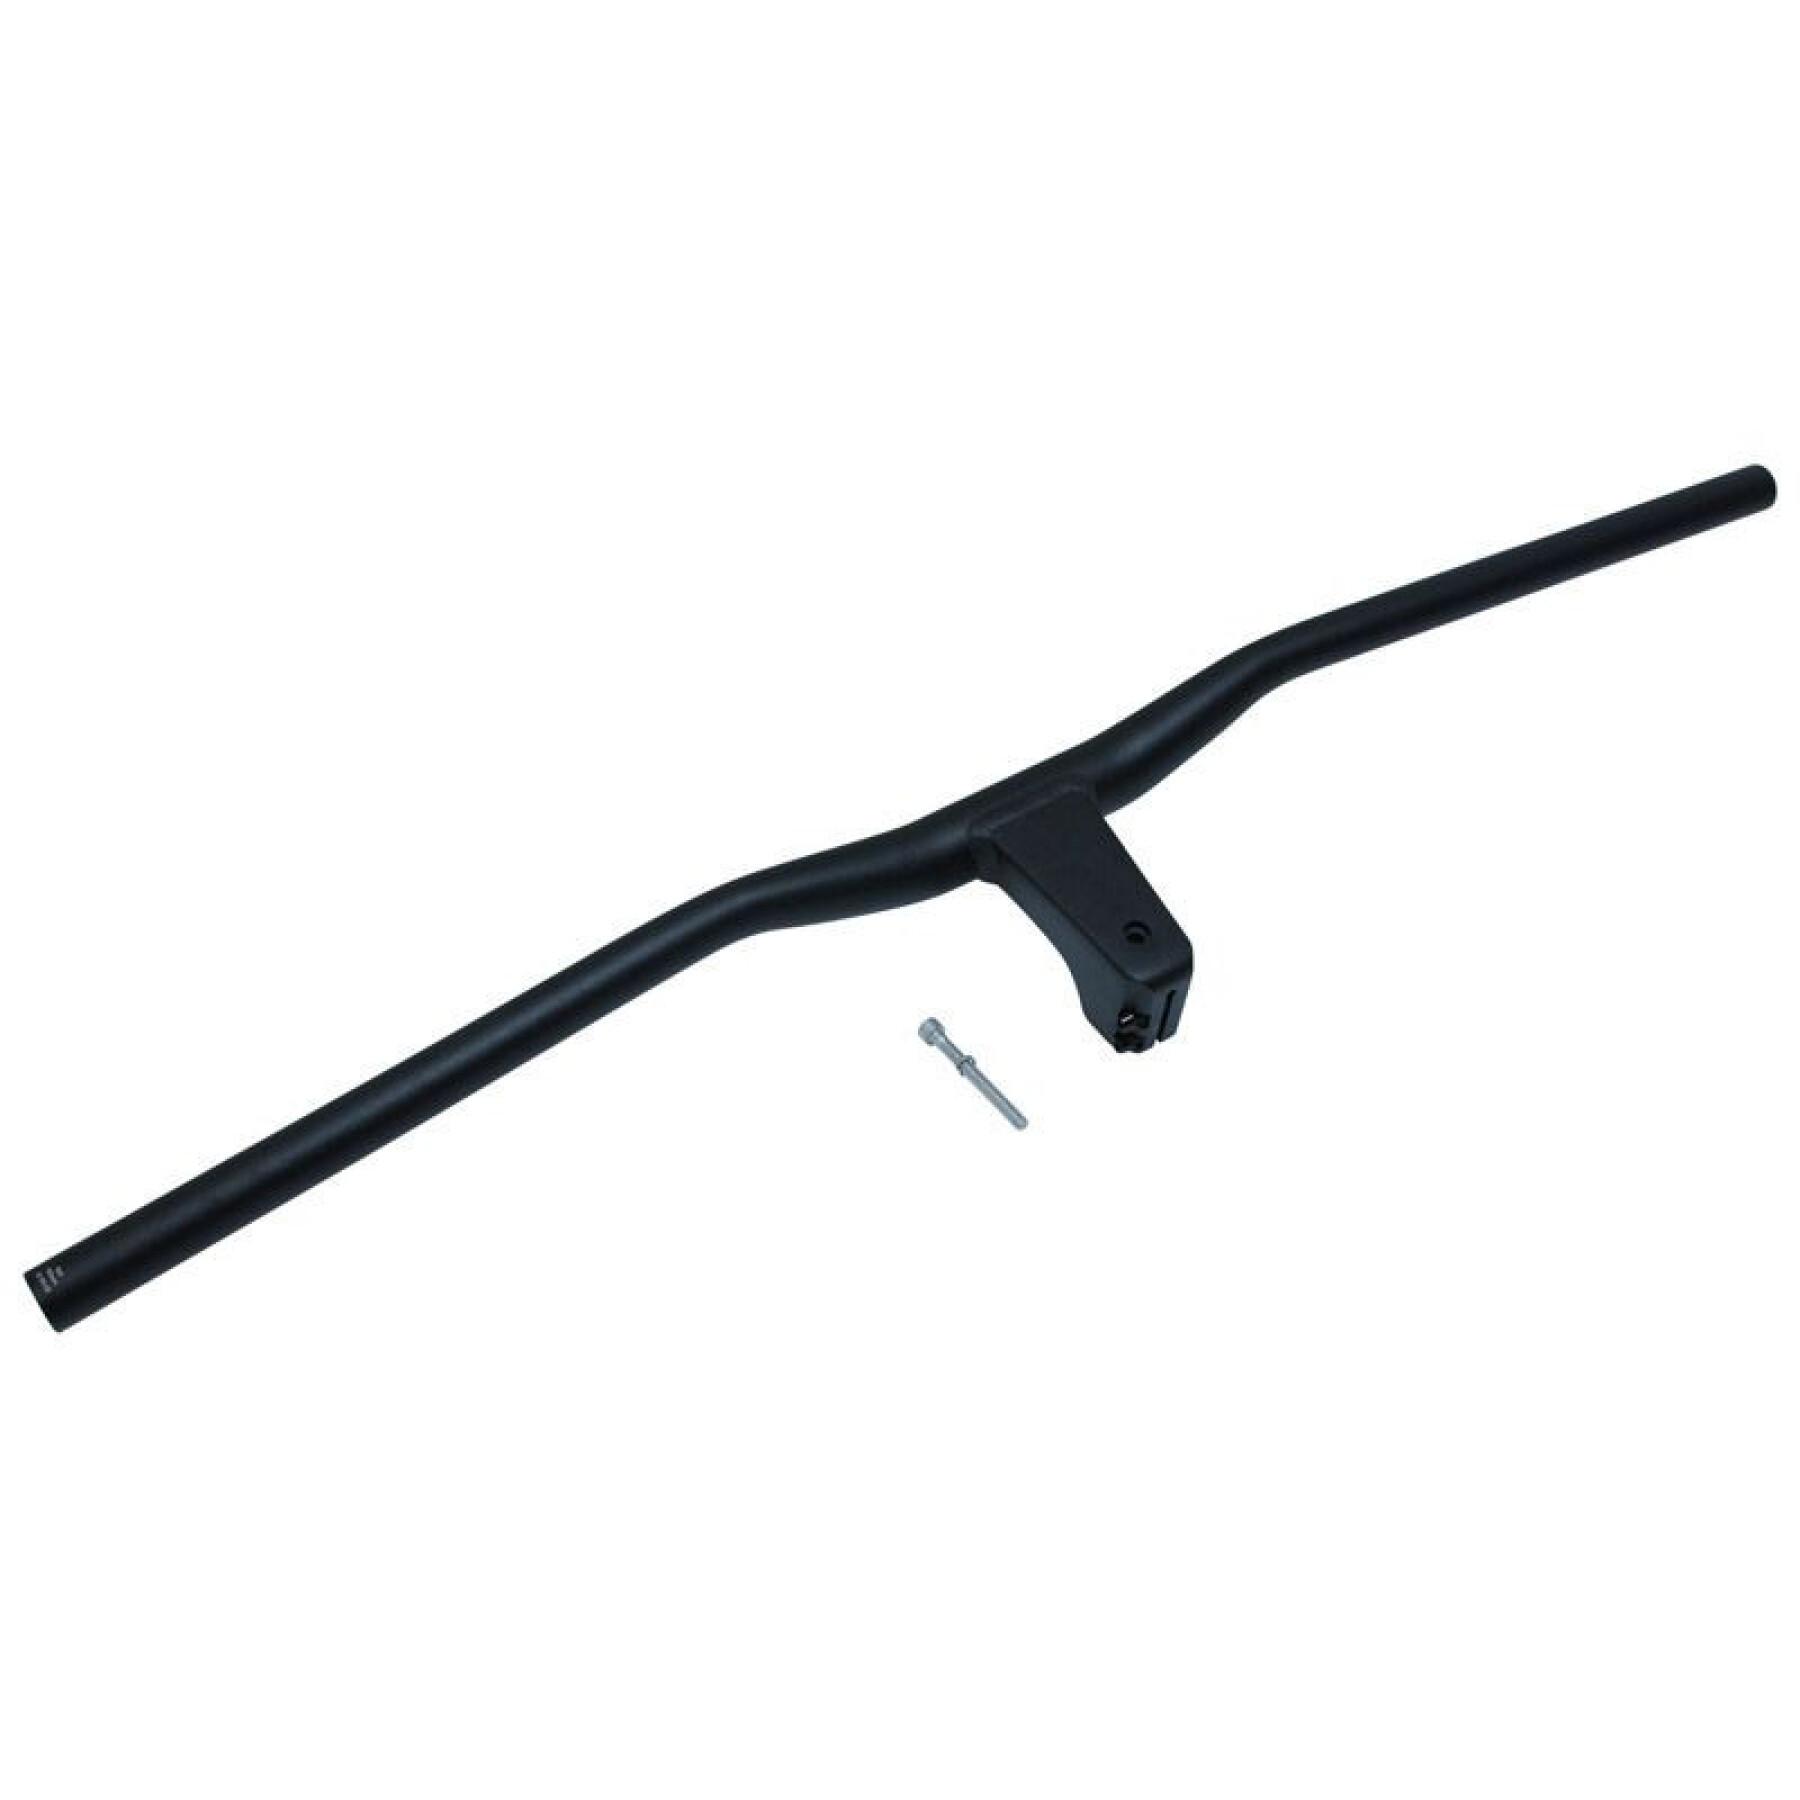 Straight handlebars with integrated stem for fork pivot P2R 1"1-8 (28.6 mm)